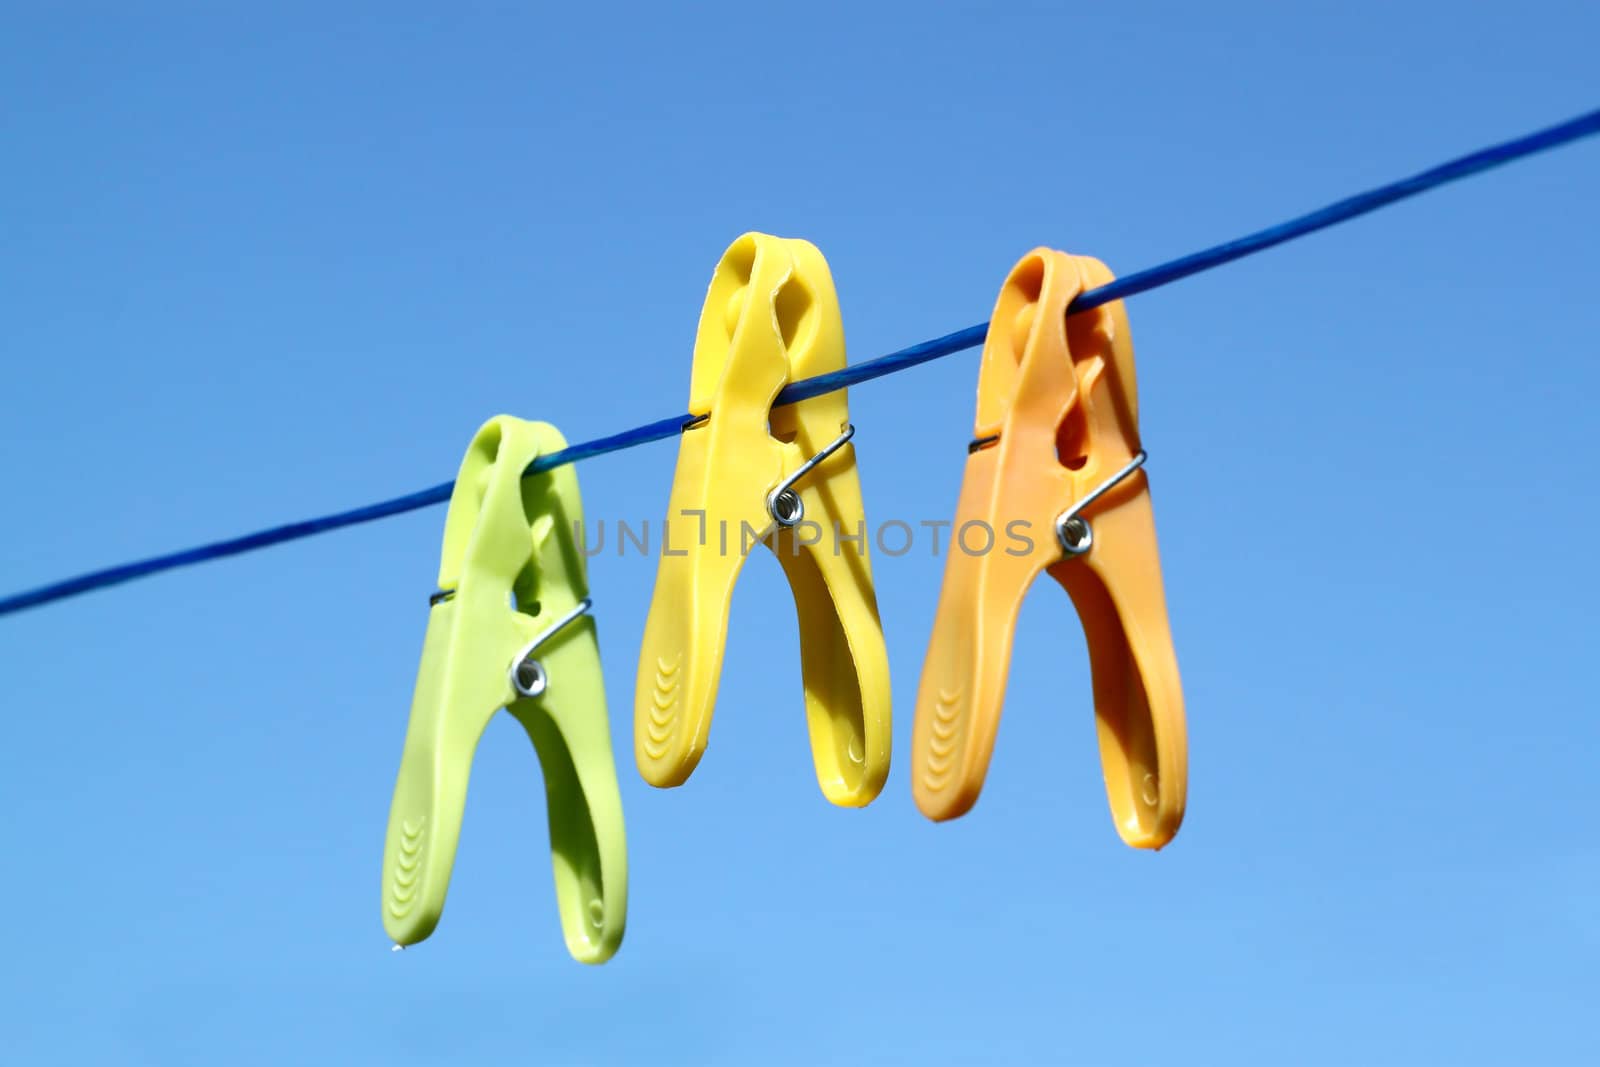 cloth pegs with a under the blue sky by artush